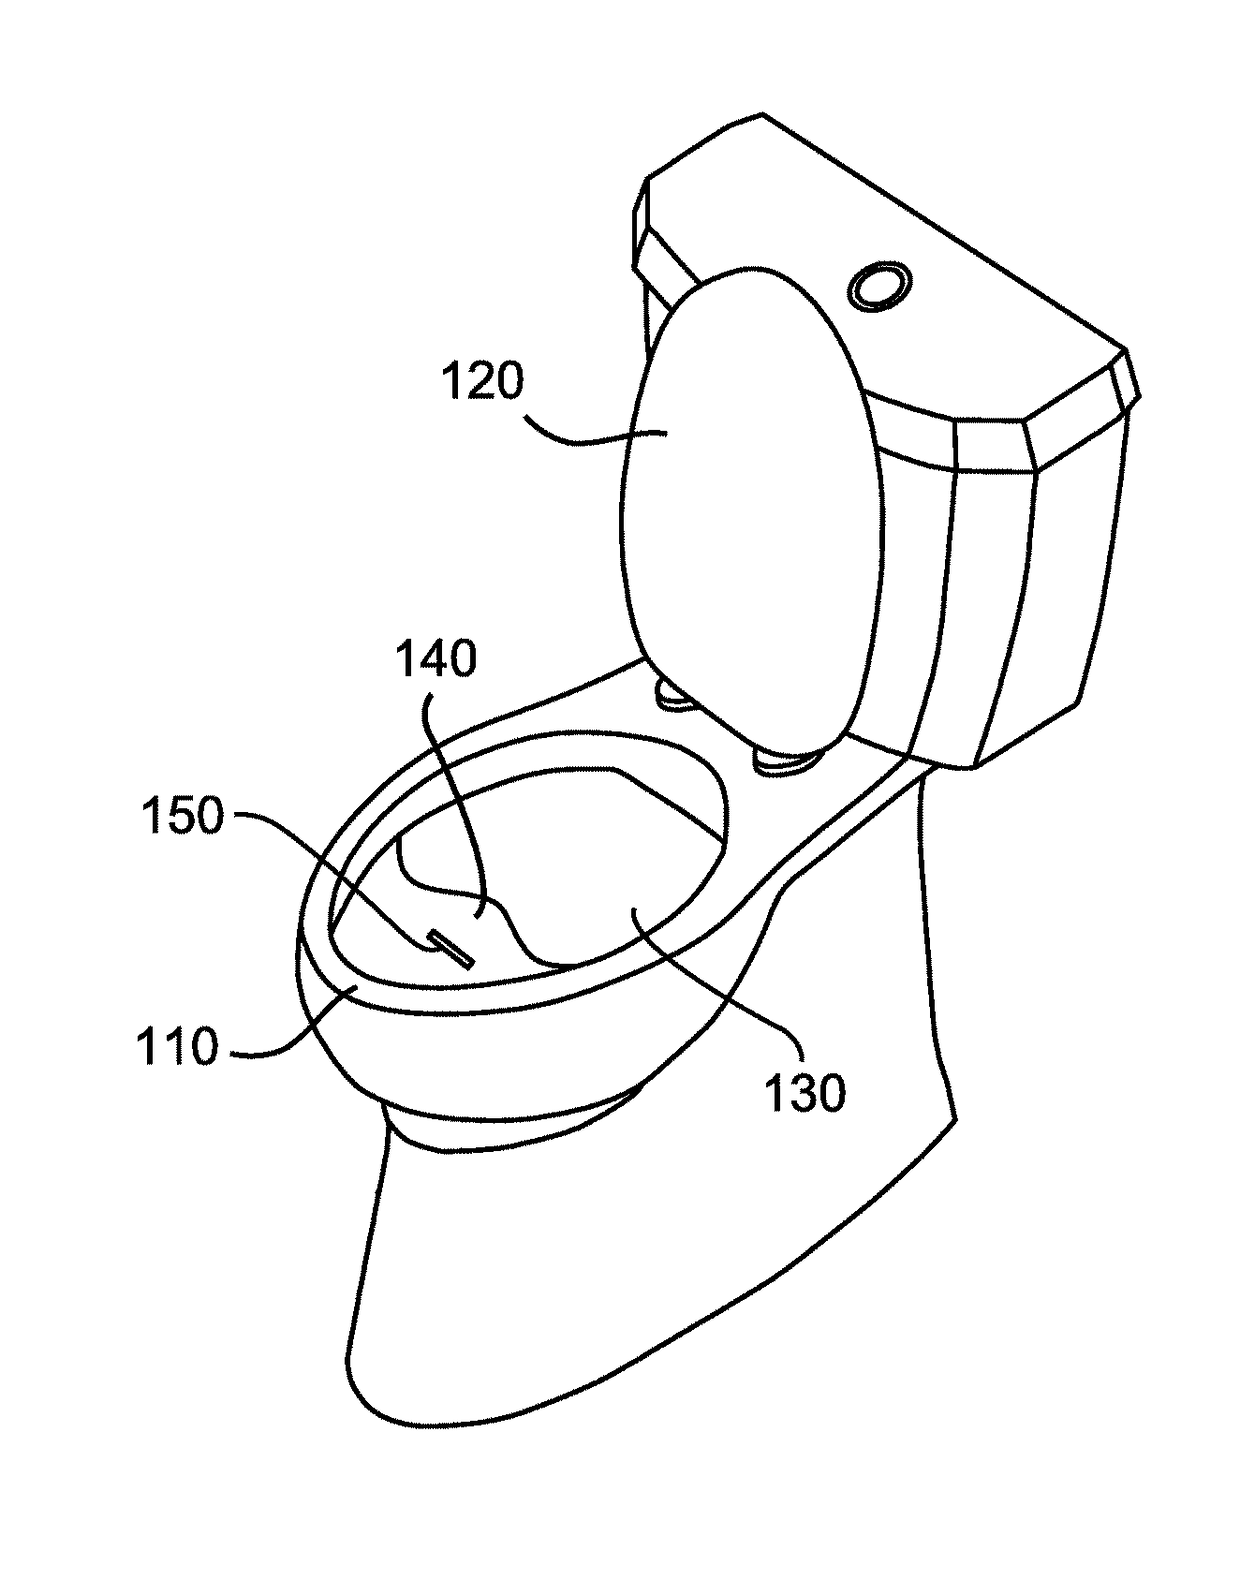 Toilet that detects fluorescent drug markers and methods of use thereof